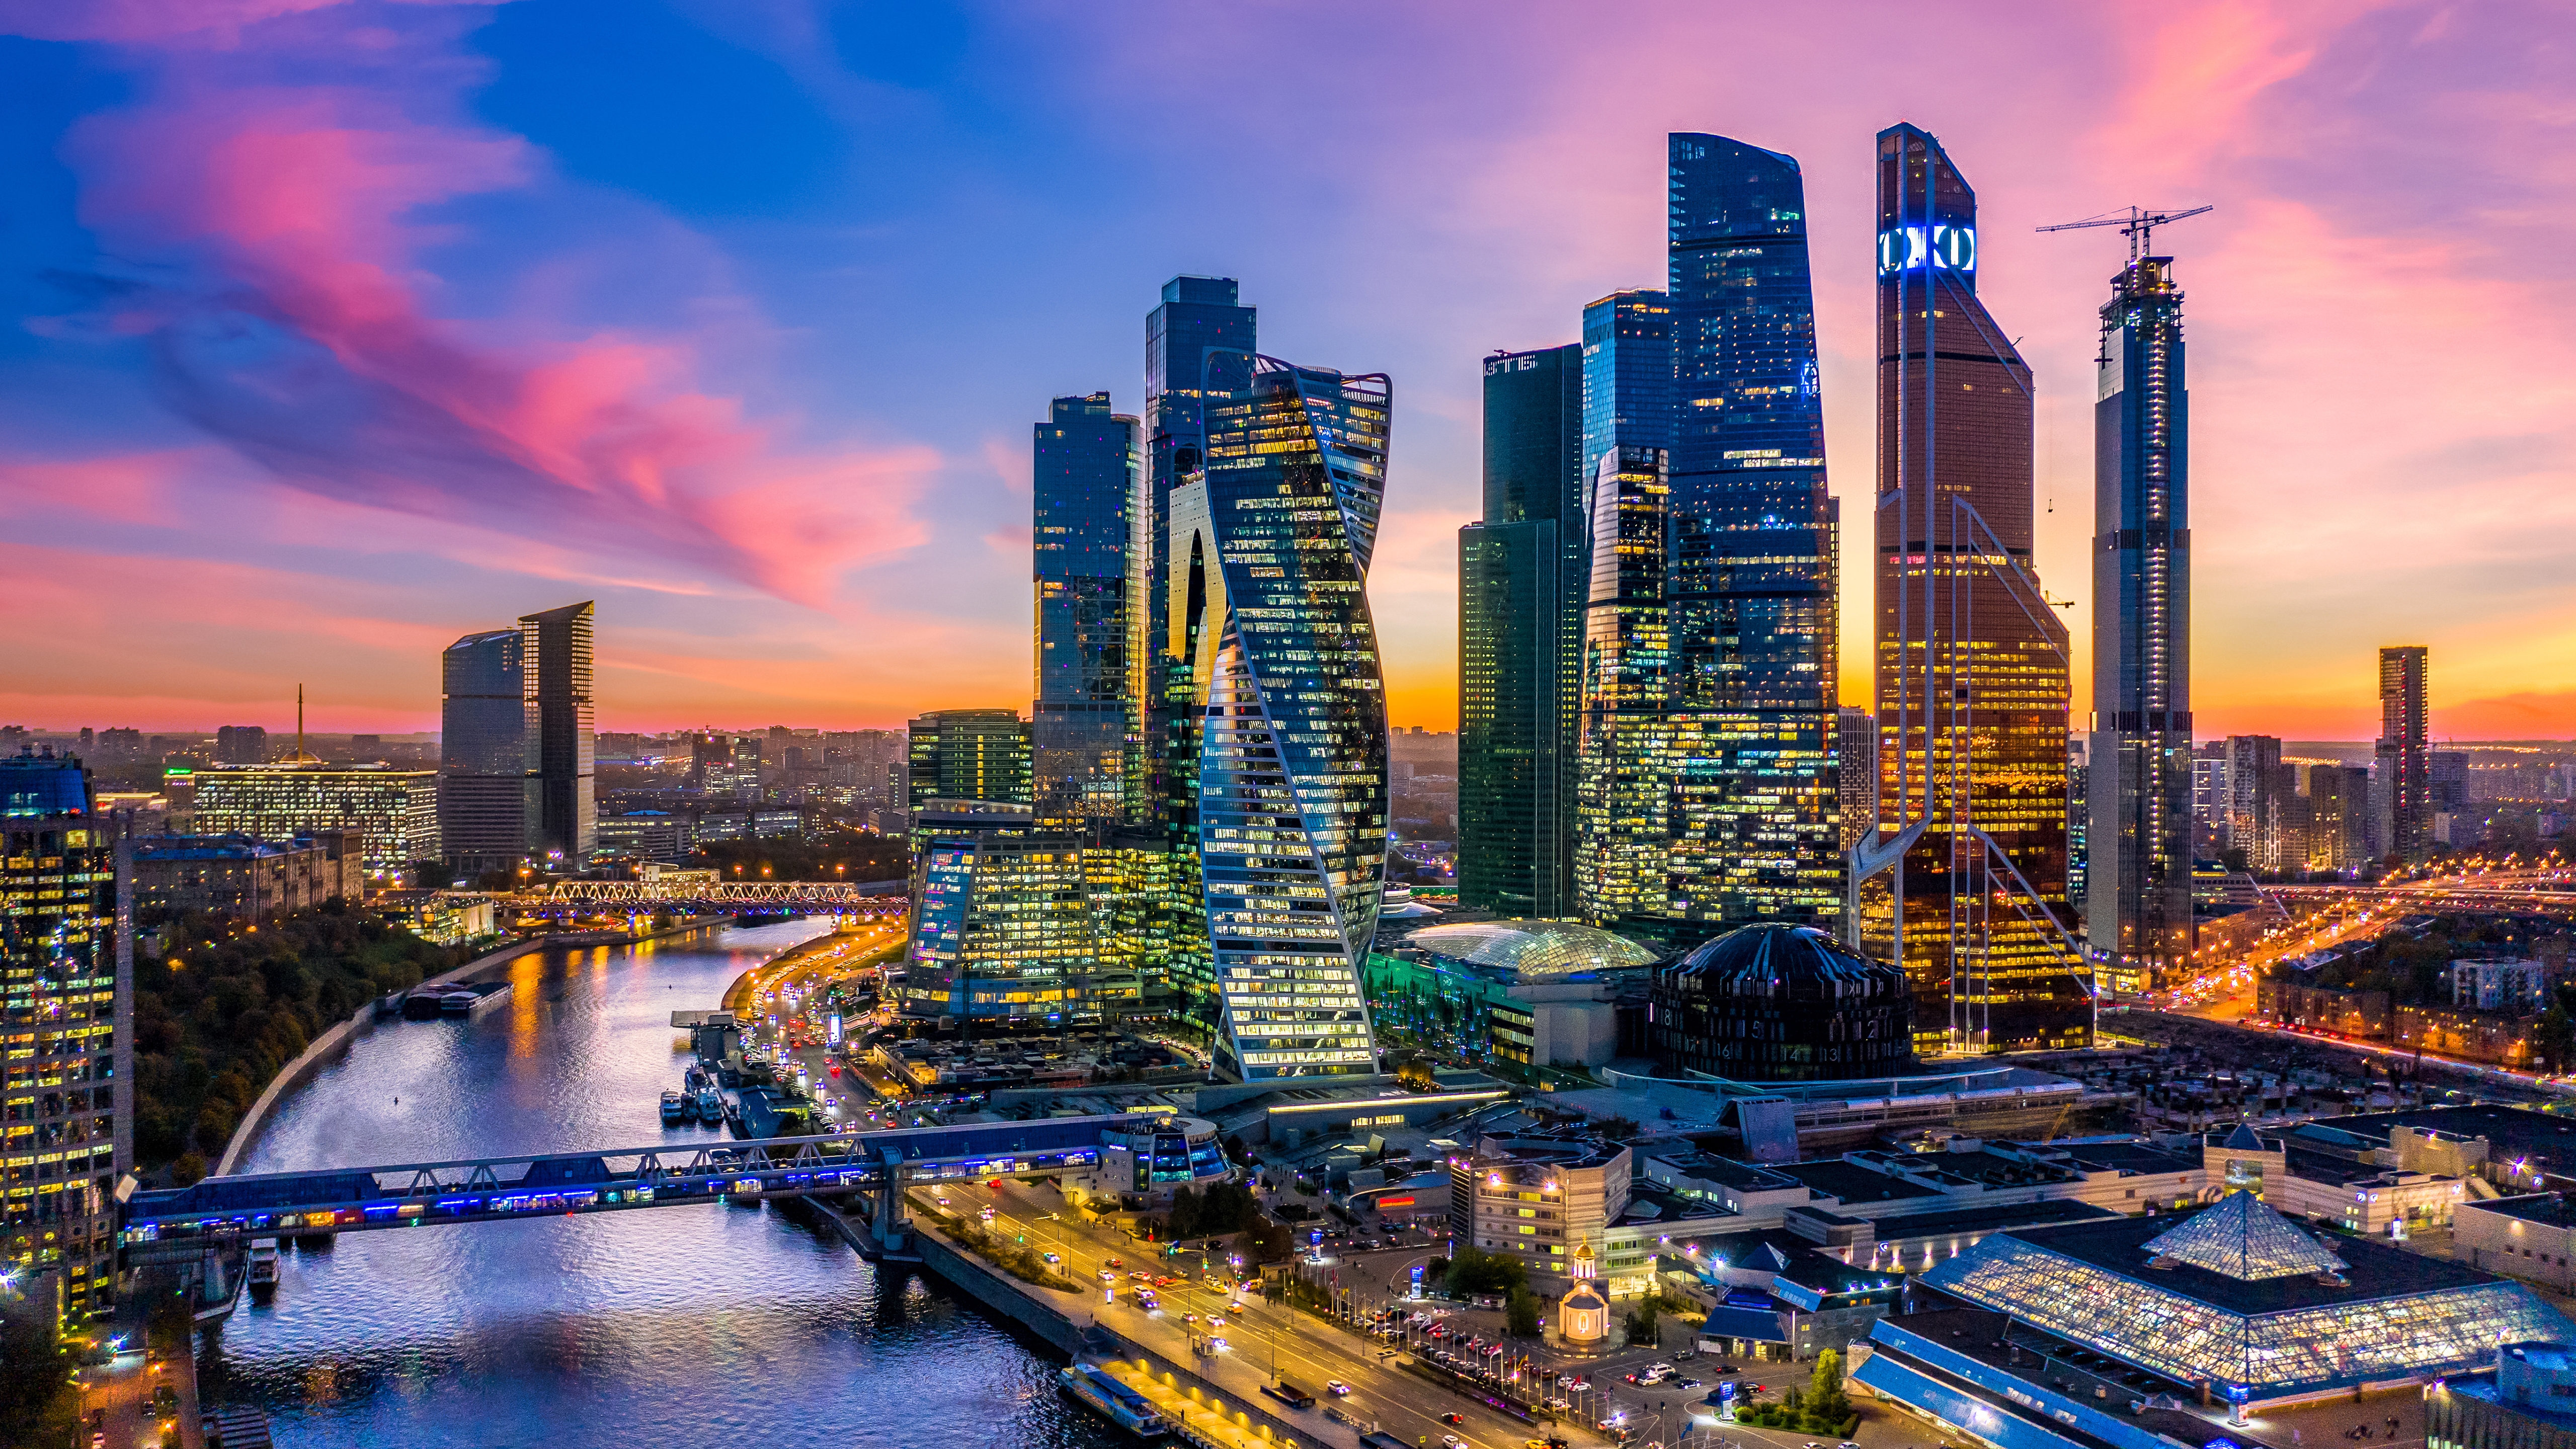 HD wallpaper, Moscow City, Moscow, Evening, City Lights, Cityscape, Skyscrapers, Russia, 5K